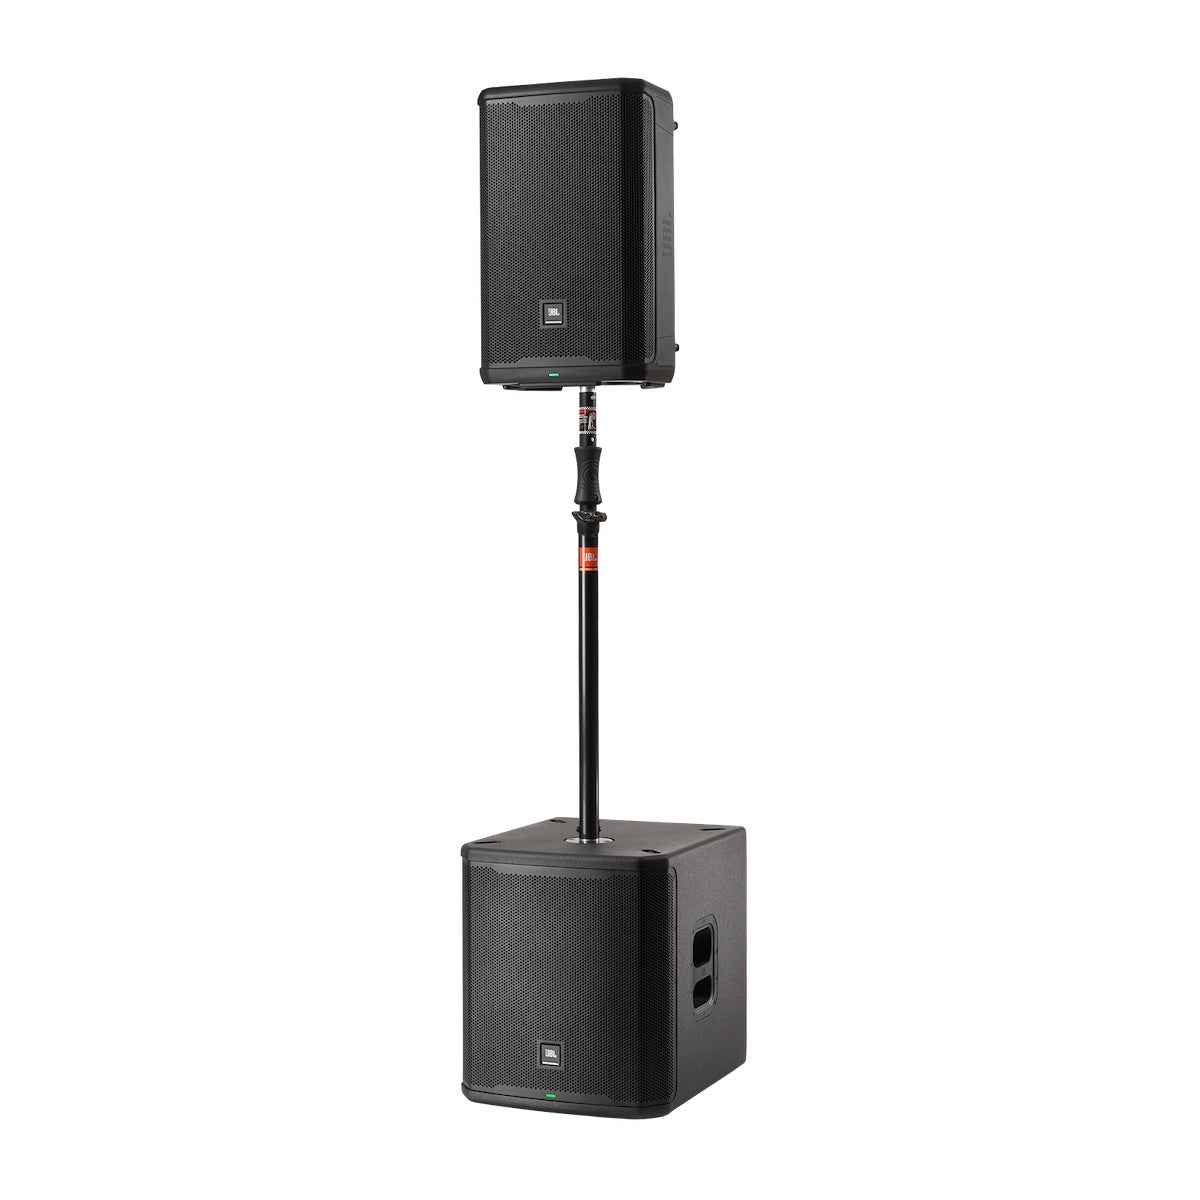 JBL PRX915XLF - Portable 15-inch Powered Subwoofer, with pole mount